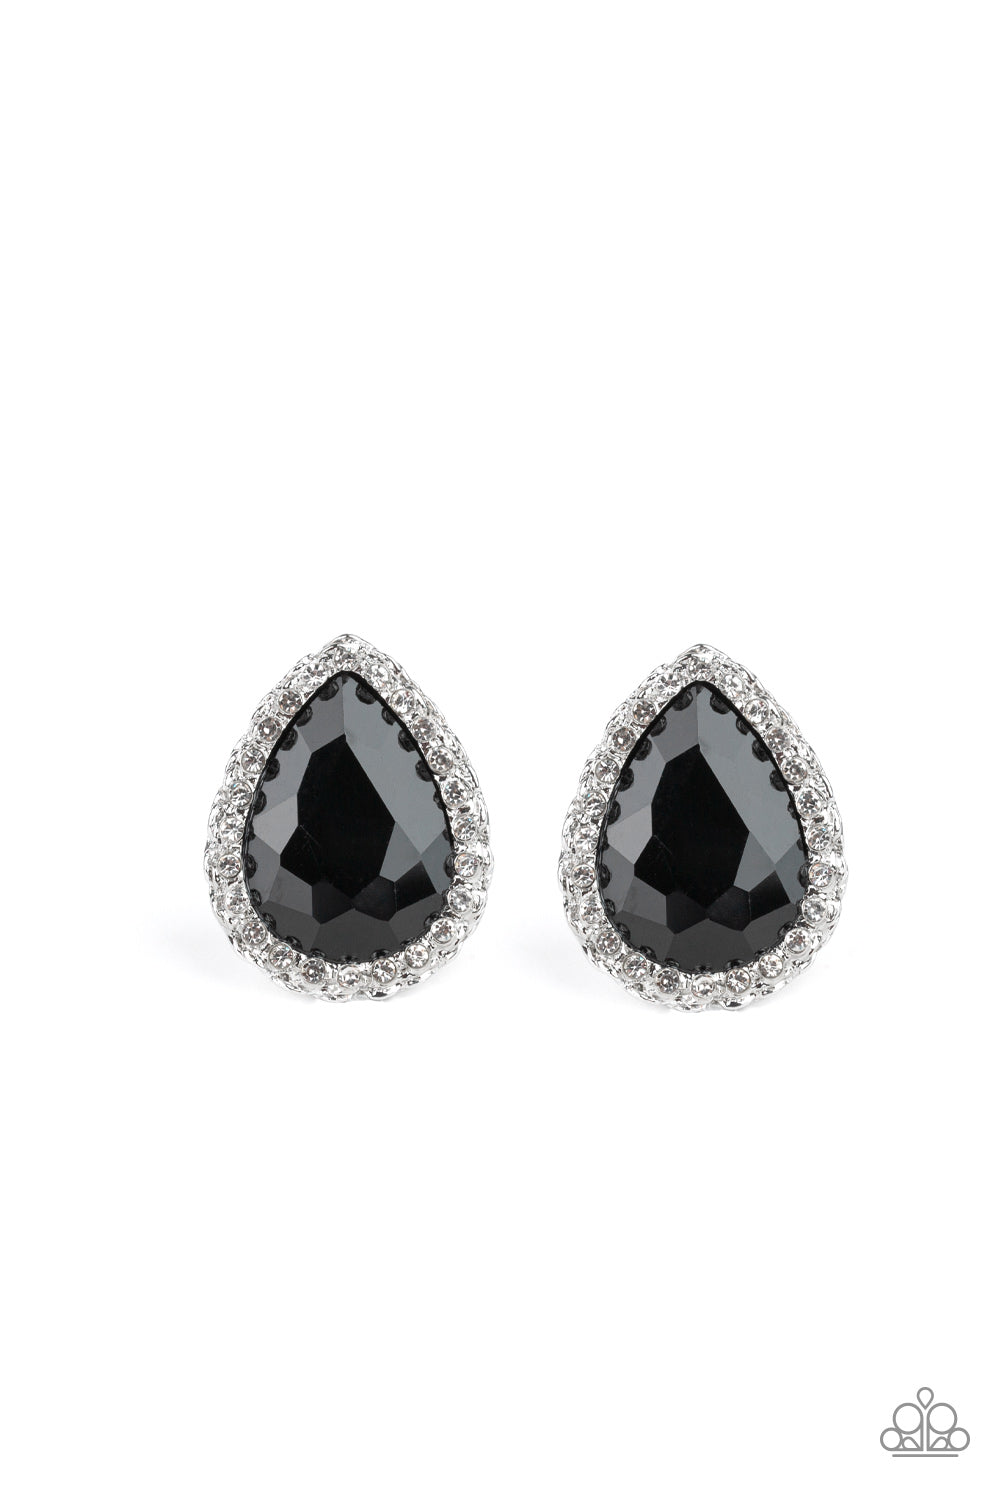 Dare To Shine Black Earring - Paparazzi Accessories  Encrusted in a ring of glittery white rhinestones, an overly dramatic black teardrop gem is pressed into a textured silver frame for a glamorous look. Earring attaches to a standard post fitting.  All Paparazzi Accessories are lead free and nickel free!  Sold as one pair of post earrings.